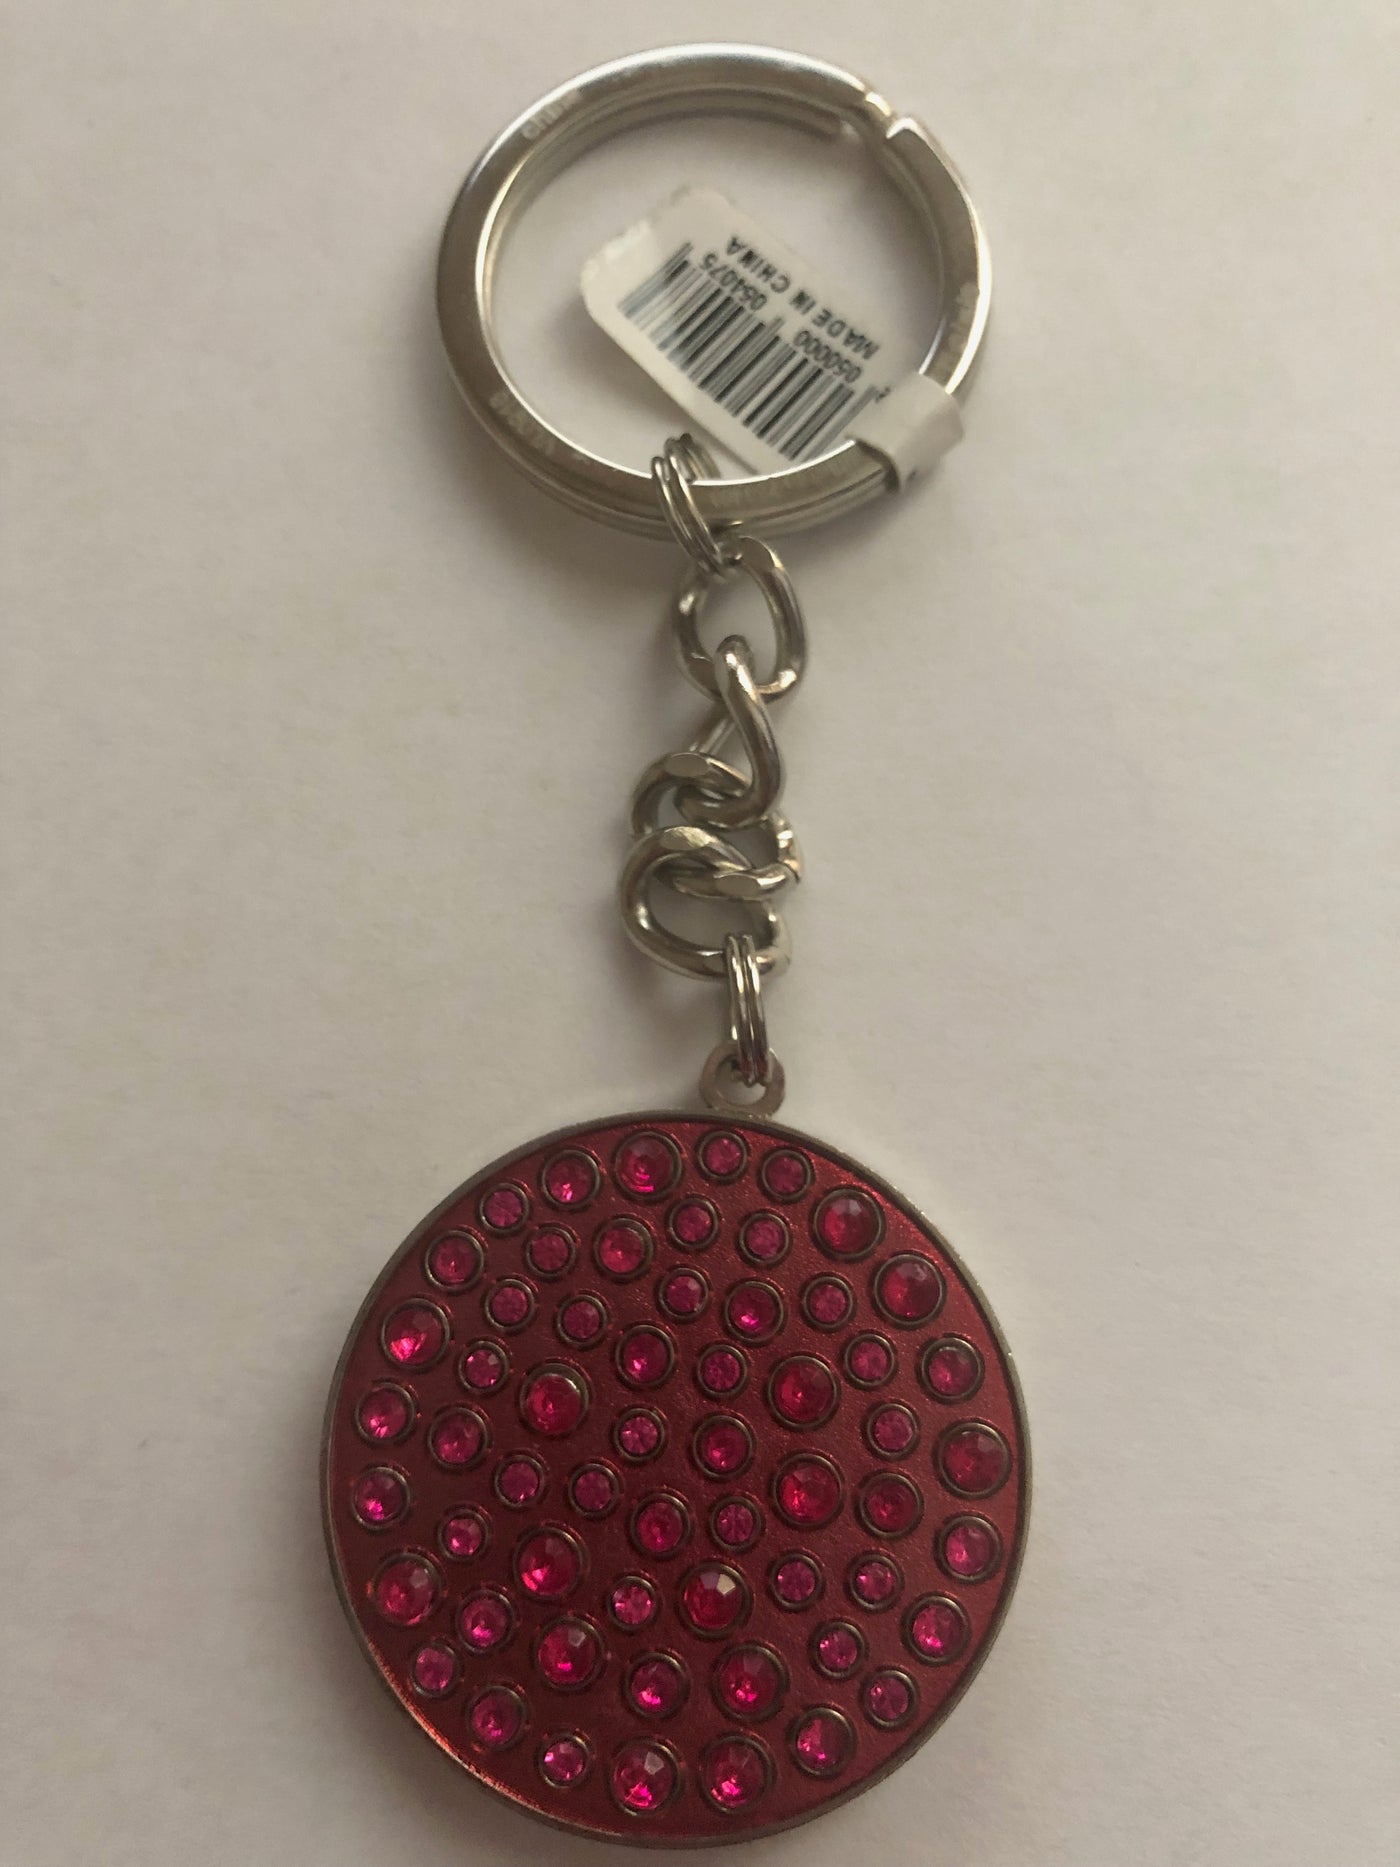 M&M's World Fuschia Lentil with Stones Keychain New with Tag